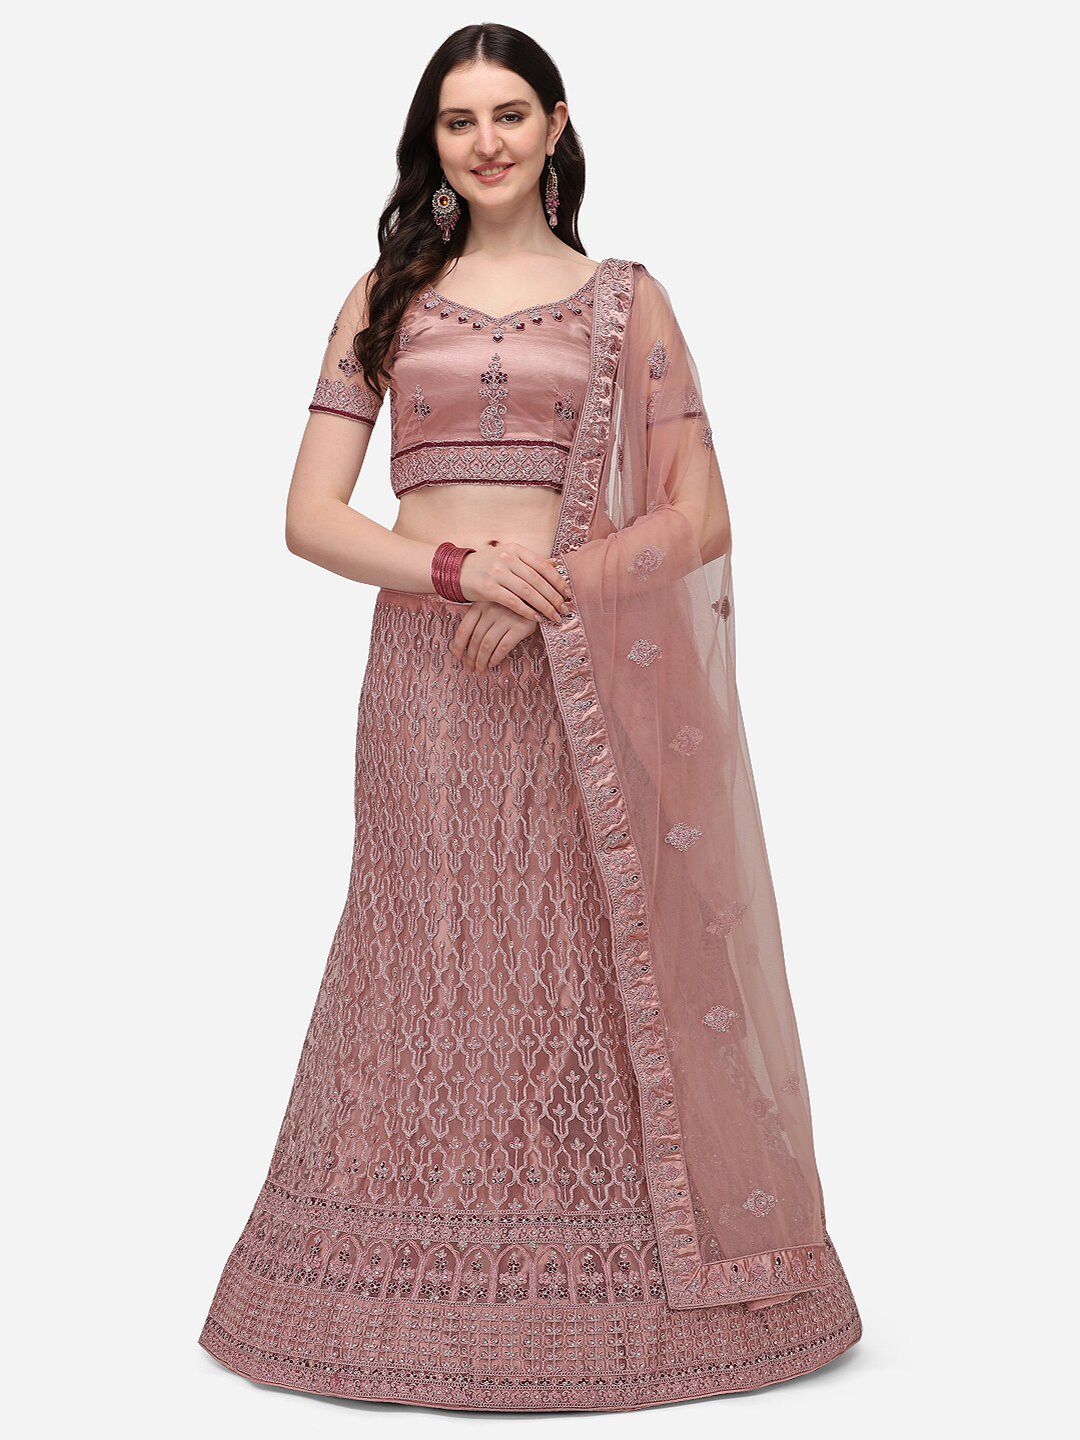 VRSALES Lavender Embroidered Semi-Stitched Lehenga & Unstitched Blouse With Dupatta Price in India